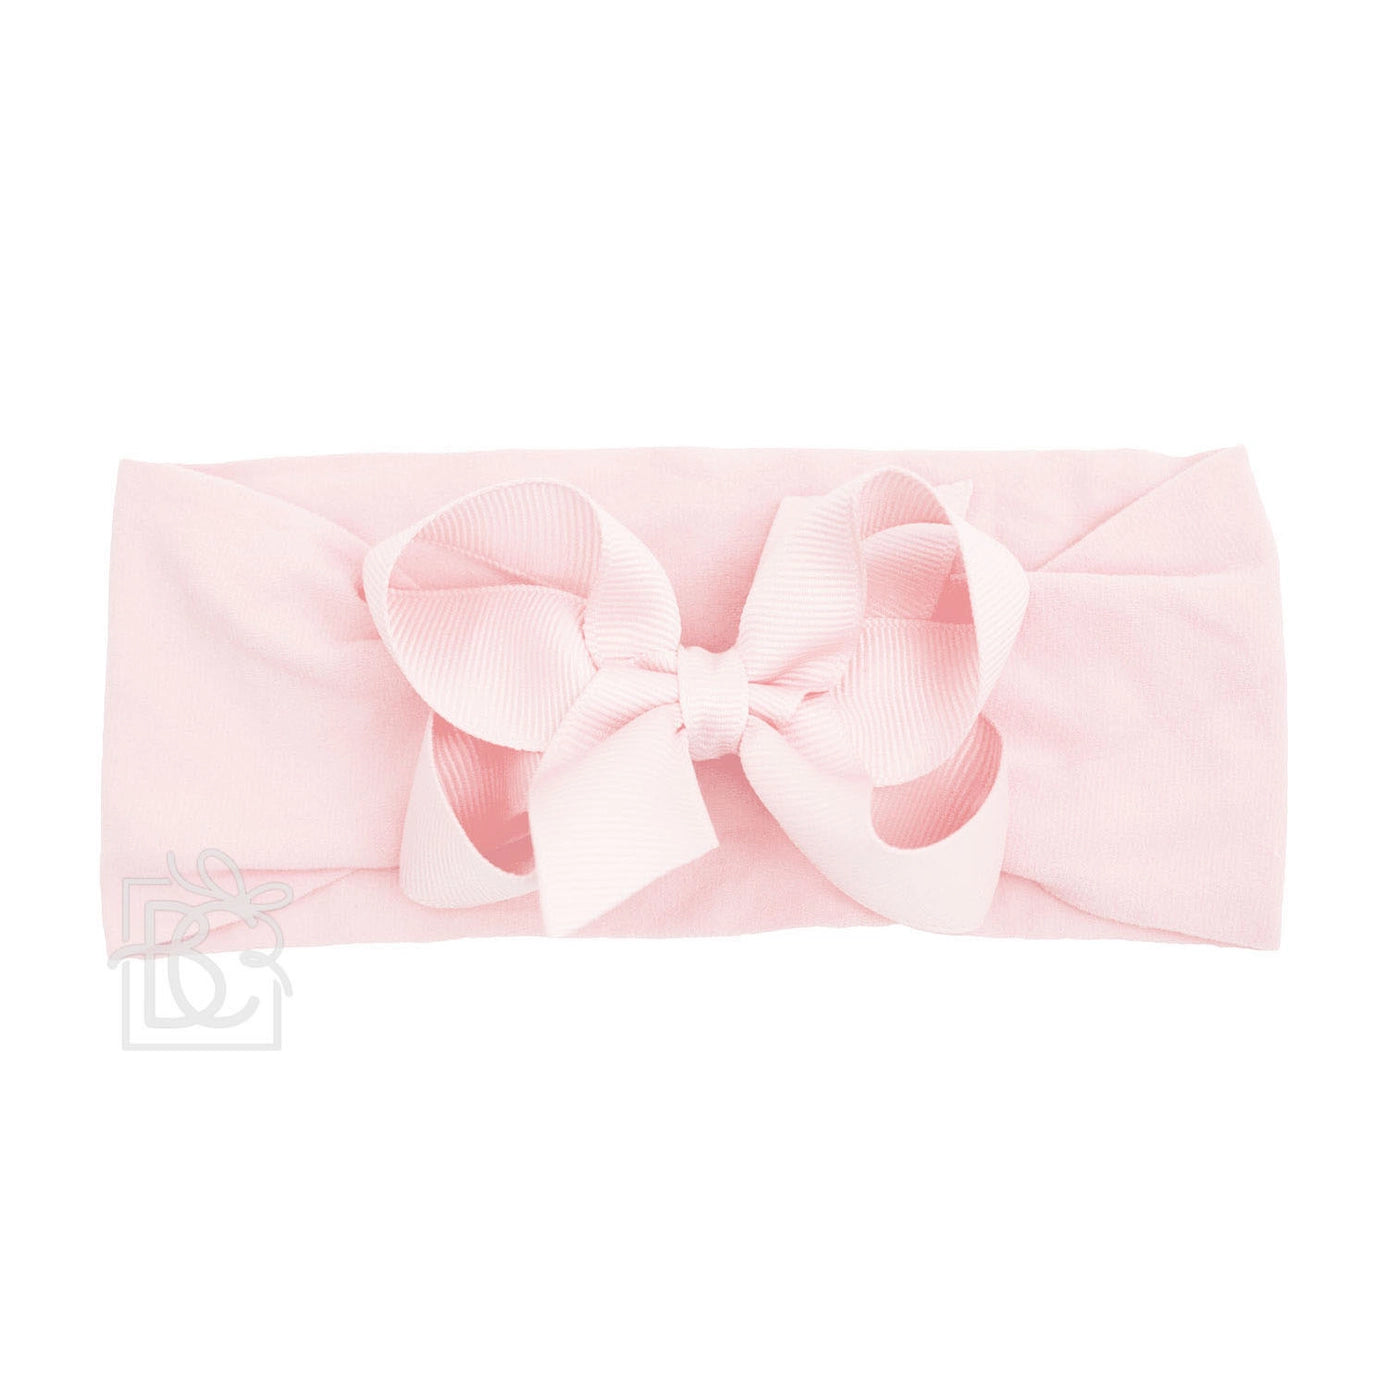 Wide Headband with 4.5" Signature Grosgrain Bow - Light Pink